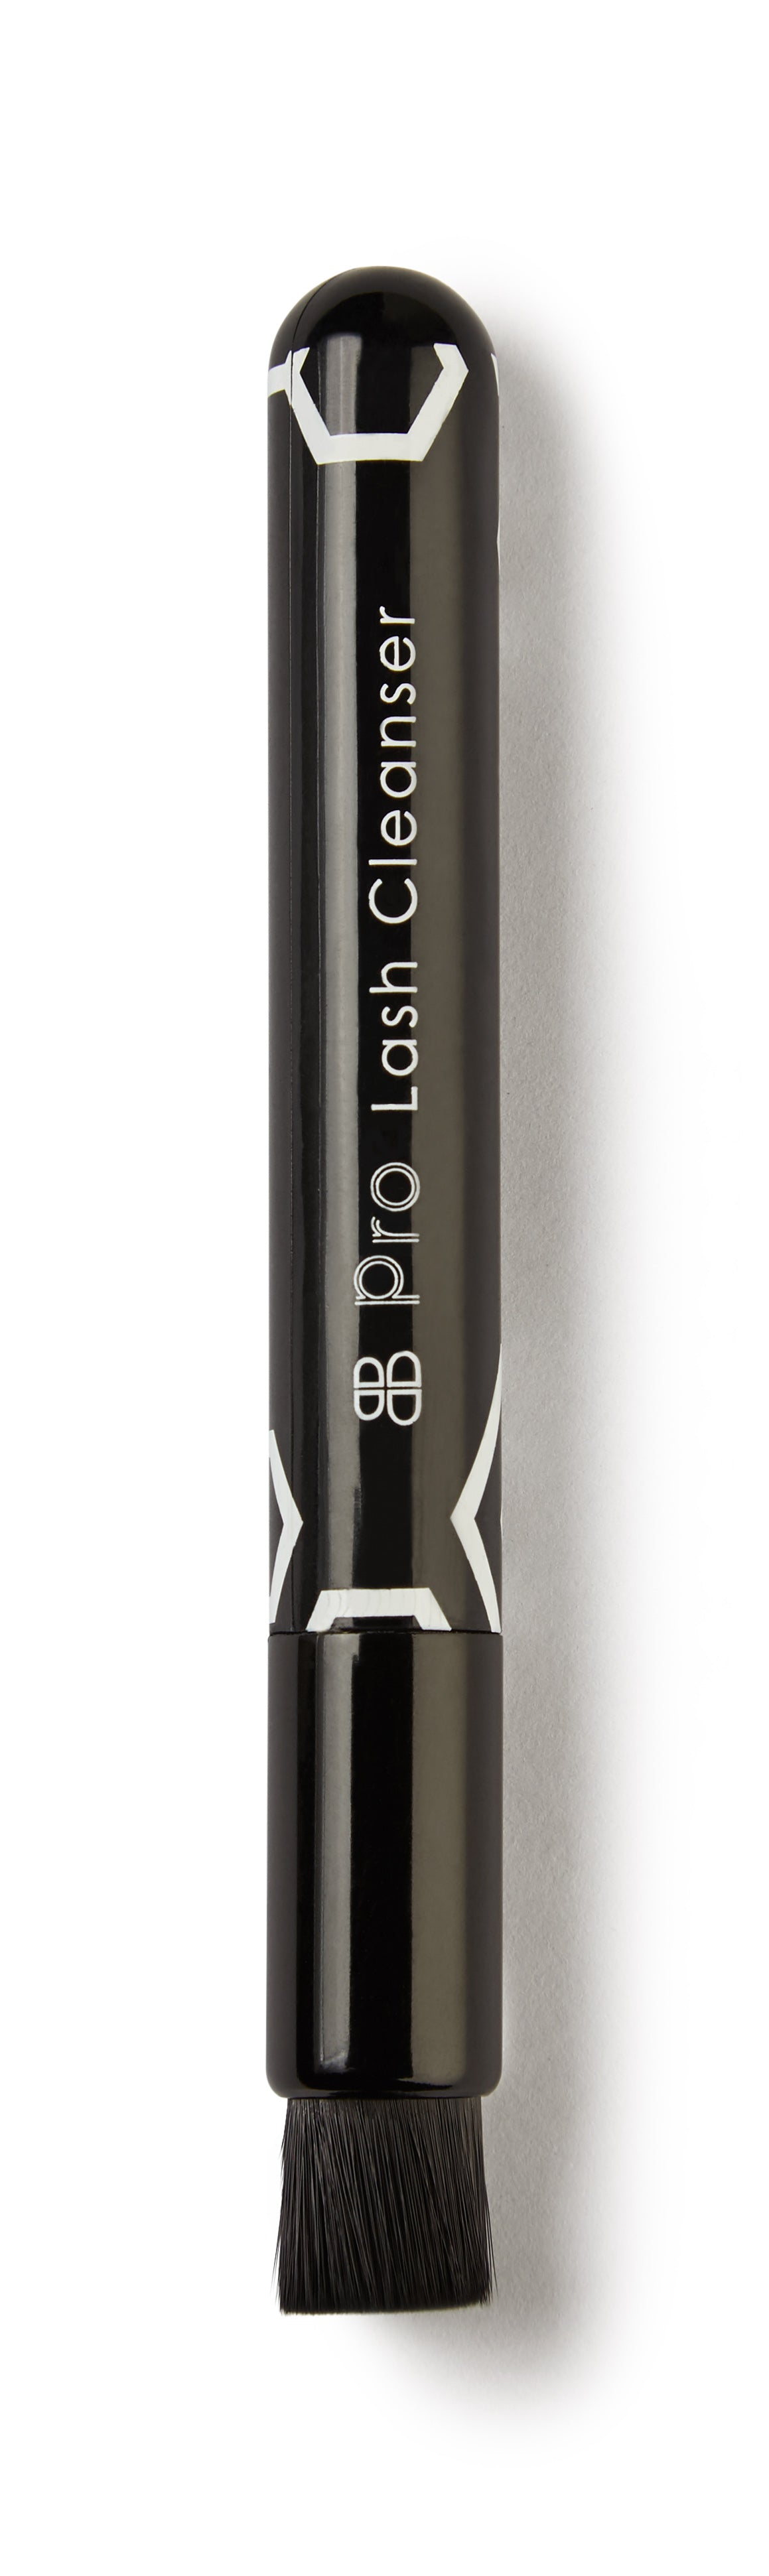 Pinceau pour shampoing à cils Beautiful brows and lashes